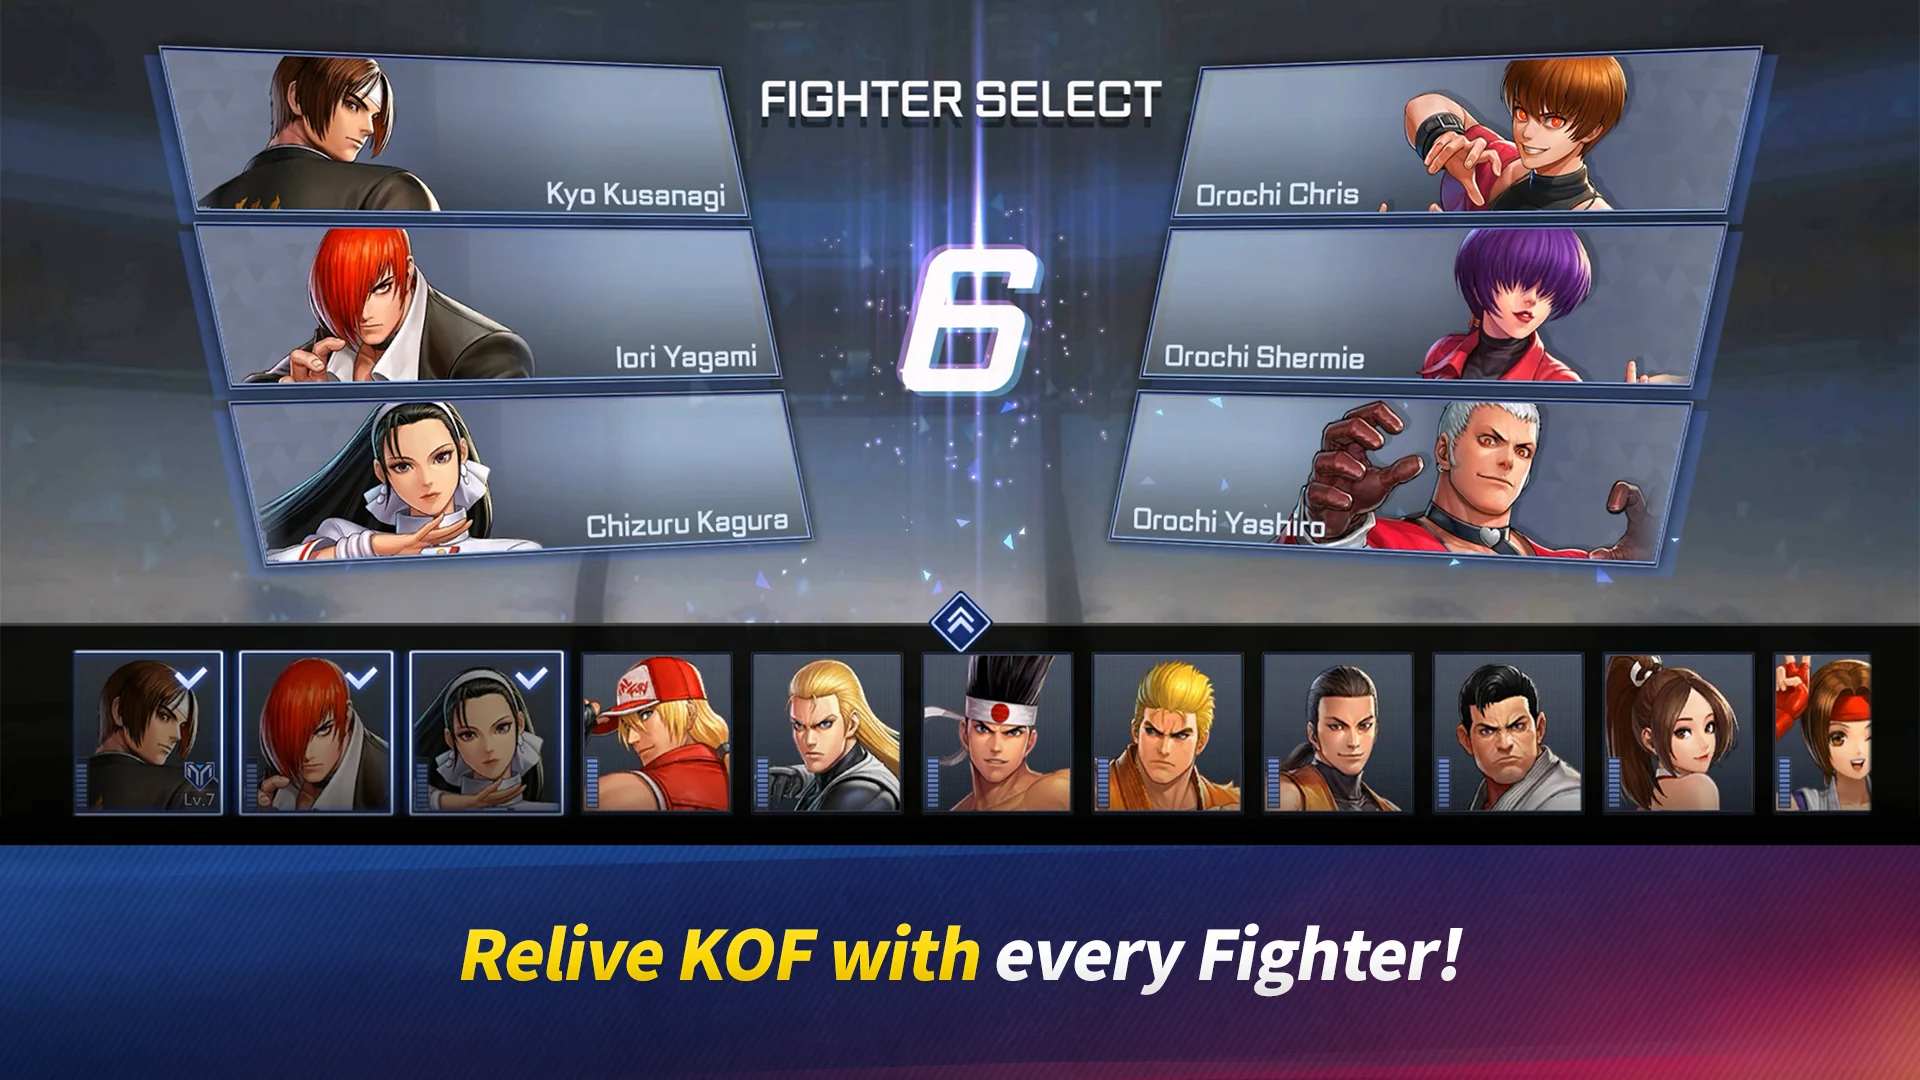 Download and play The King of Fighters ARENA on PC with MuMu Player